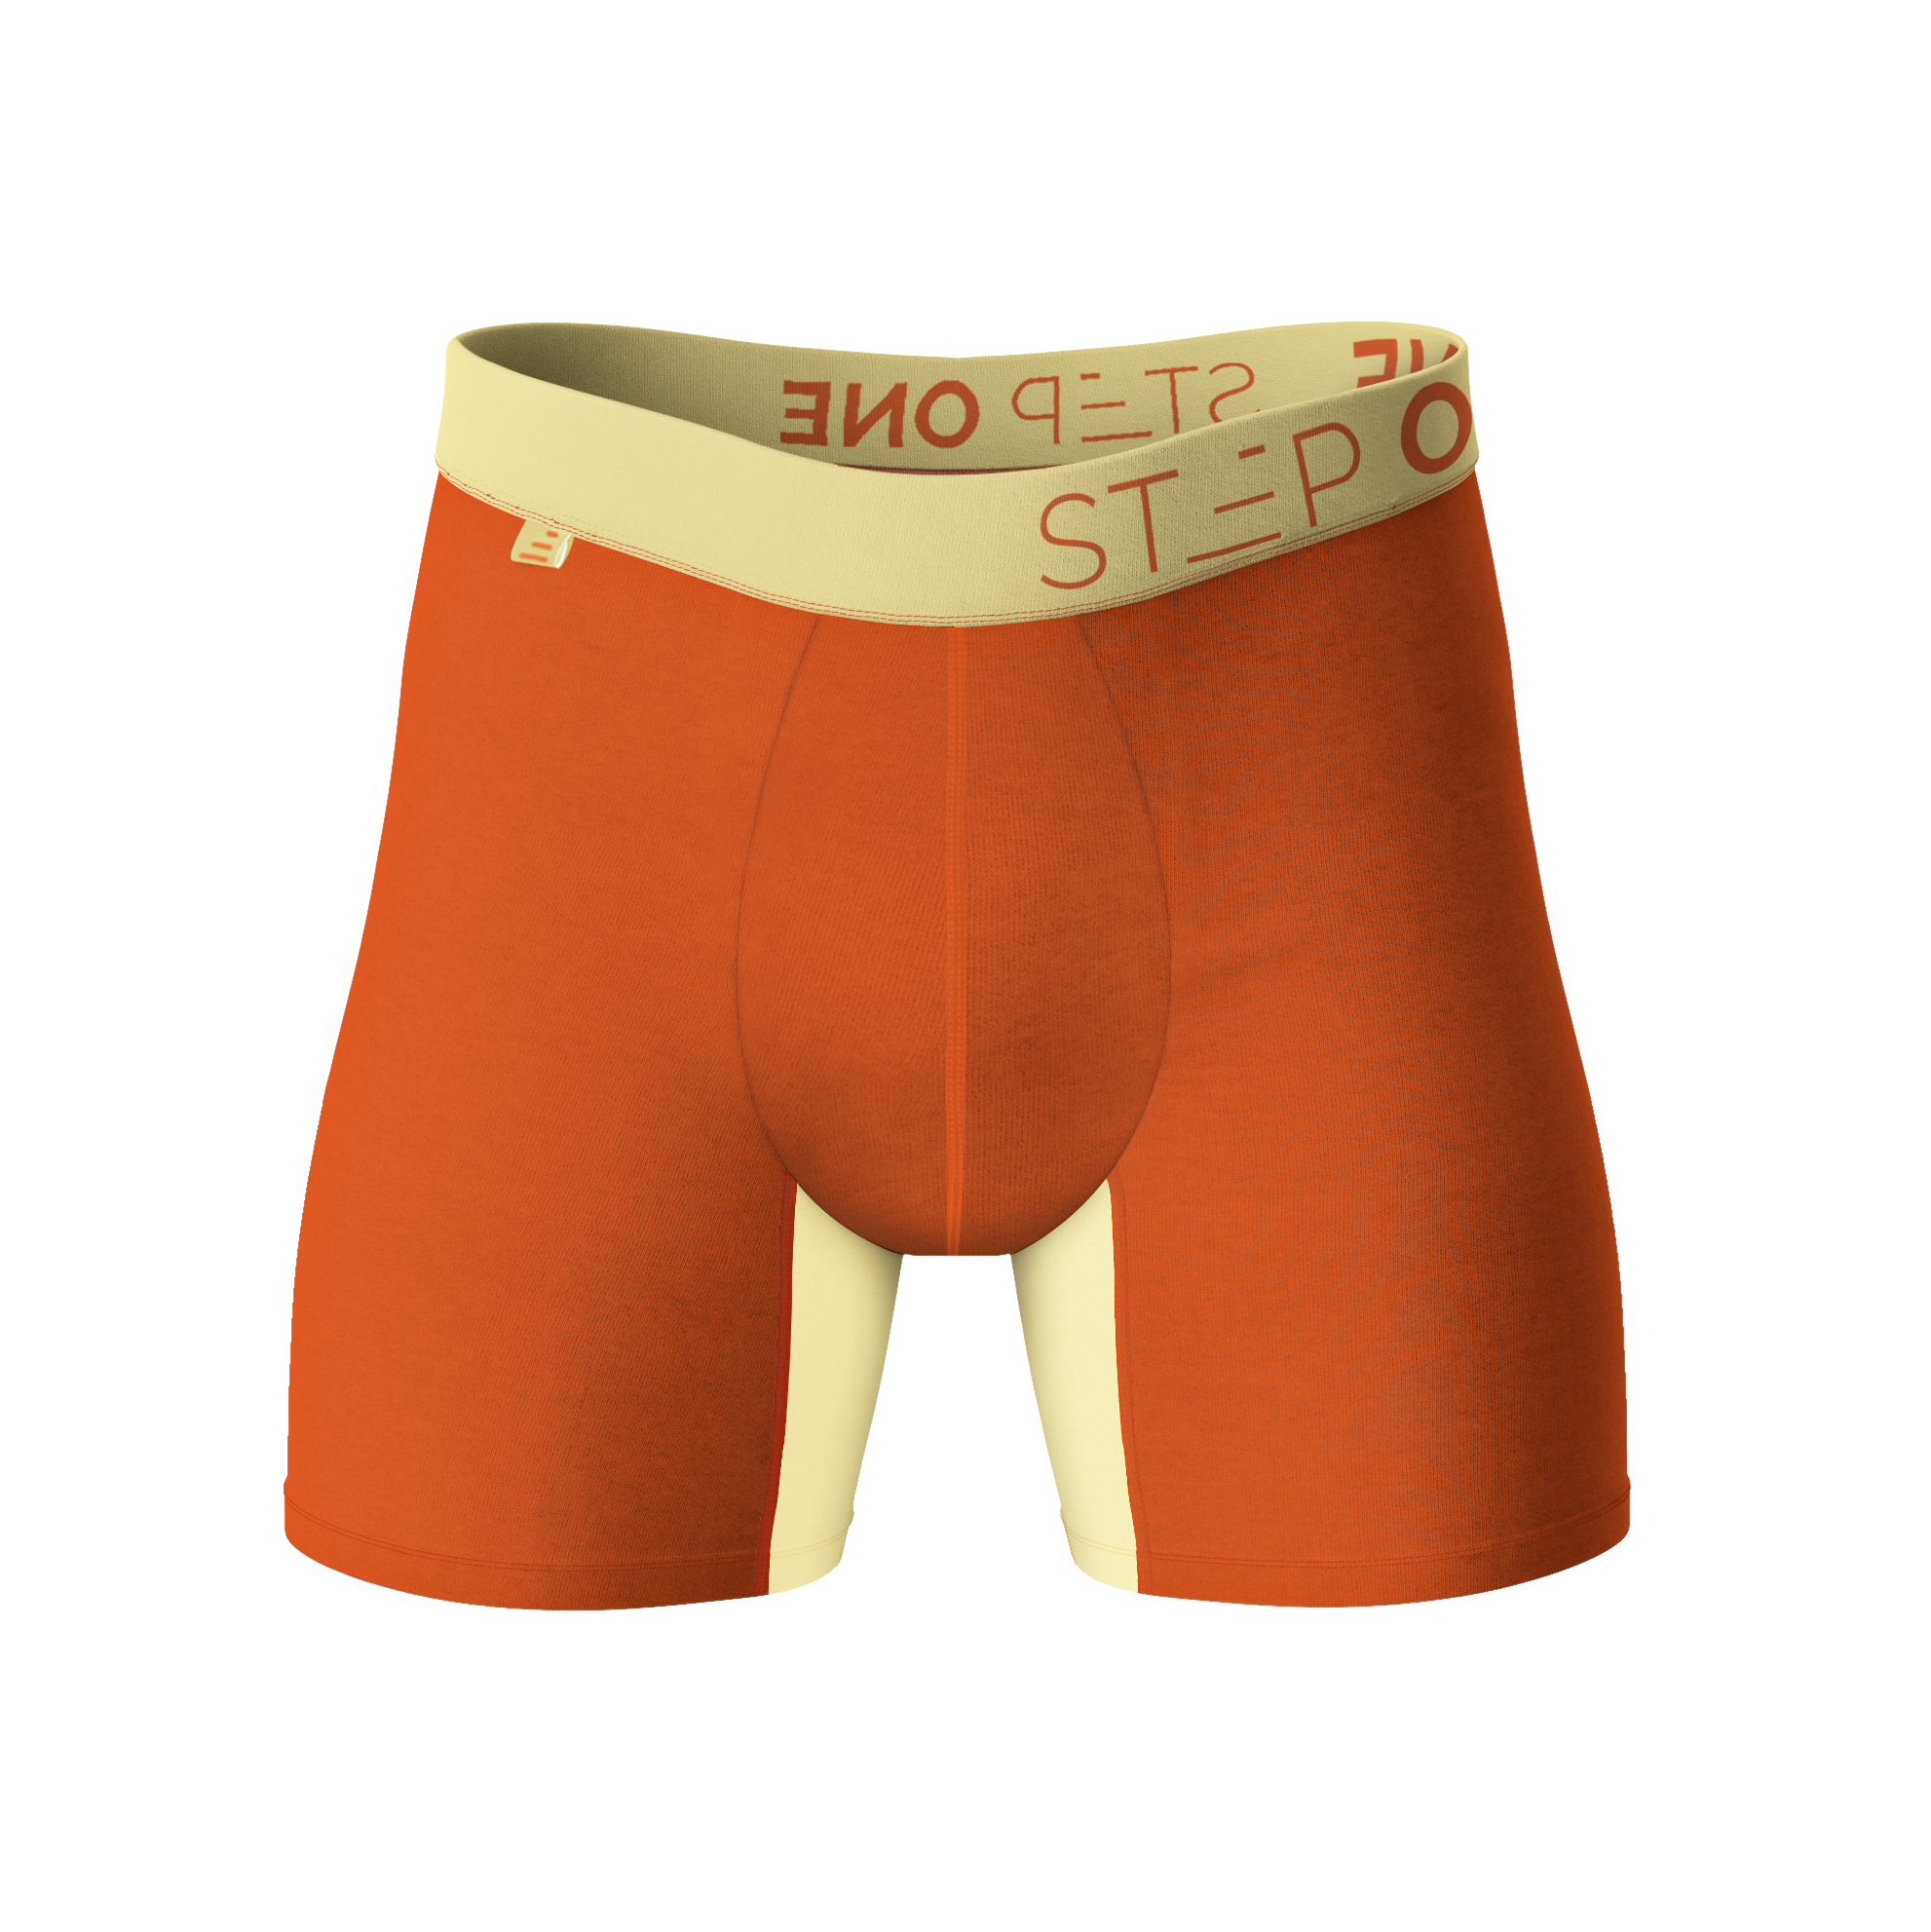 Boxer Brief - Donald Trunks - View 1